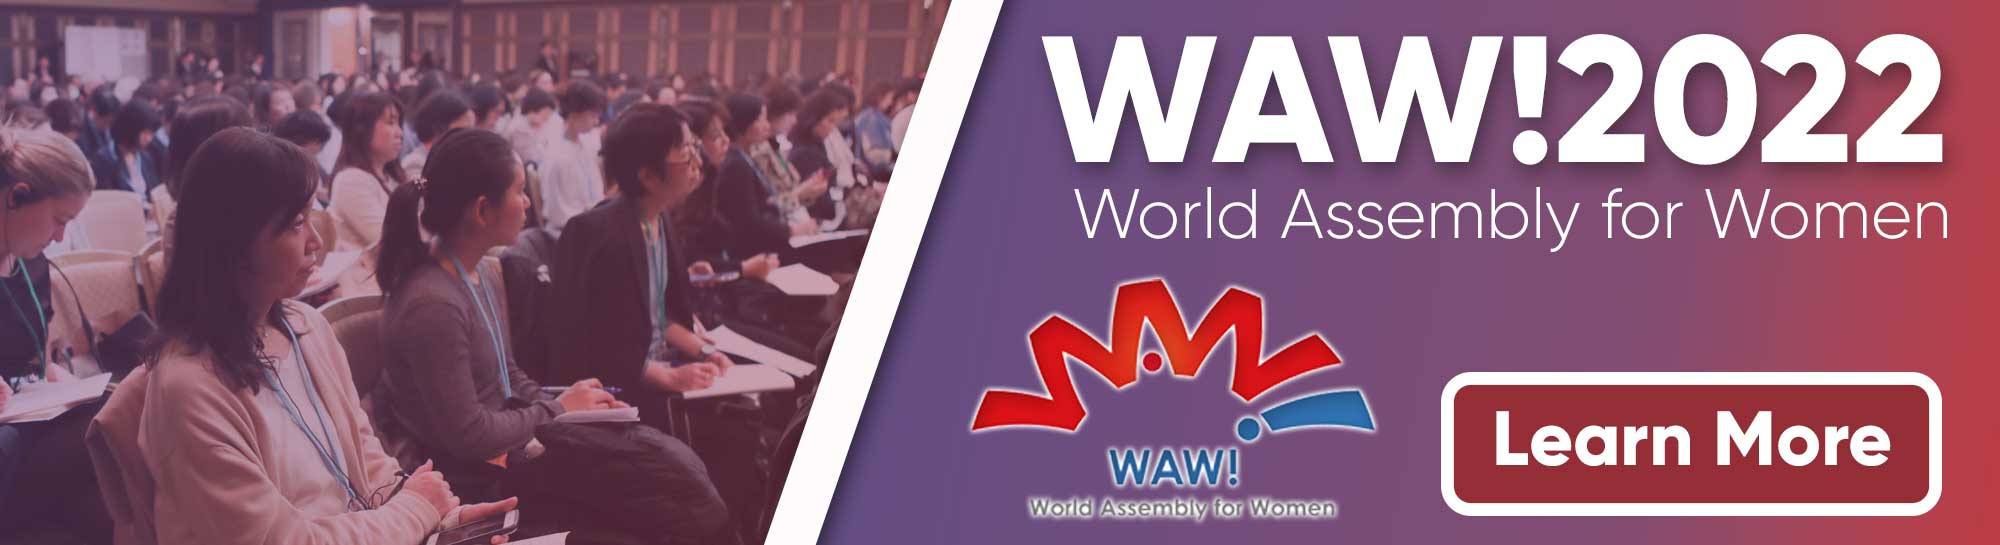 WAW!2022: Japan hosts World Assembly for Women after three-year hiatus